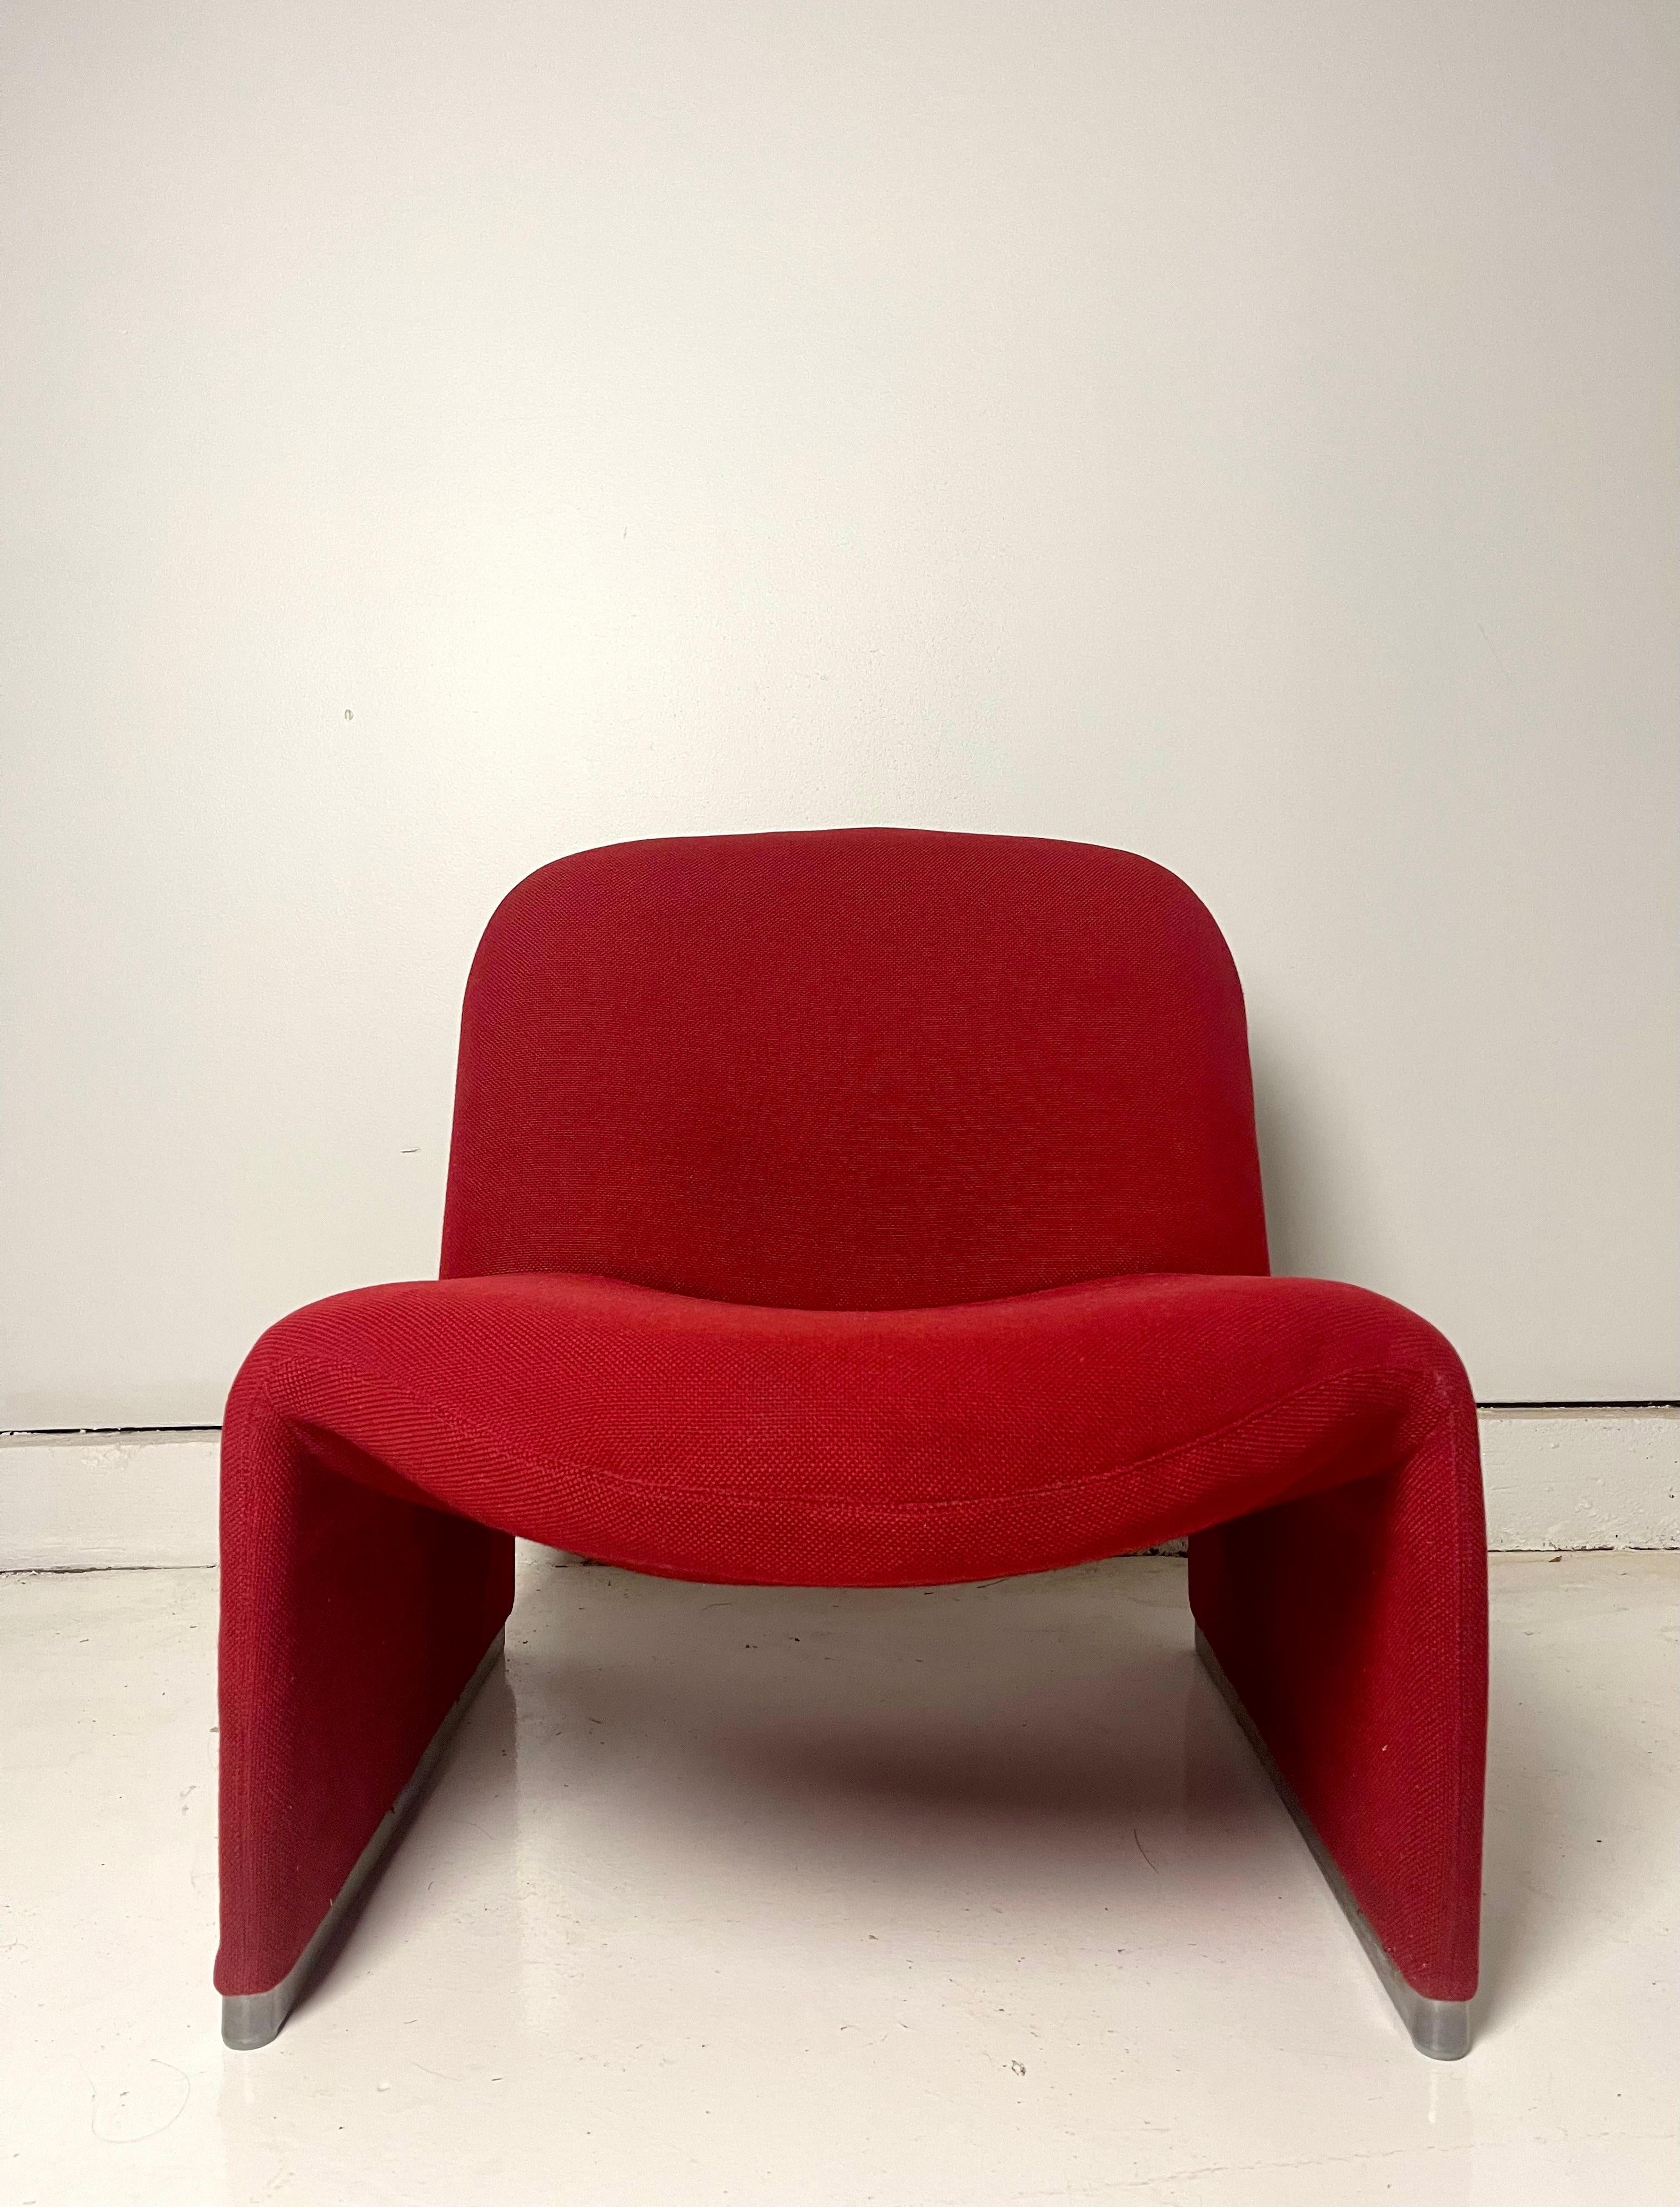 Alky chair in red by Giancarlo Piretti for Anonima Castelli, Italy 1970.